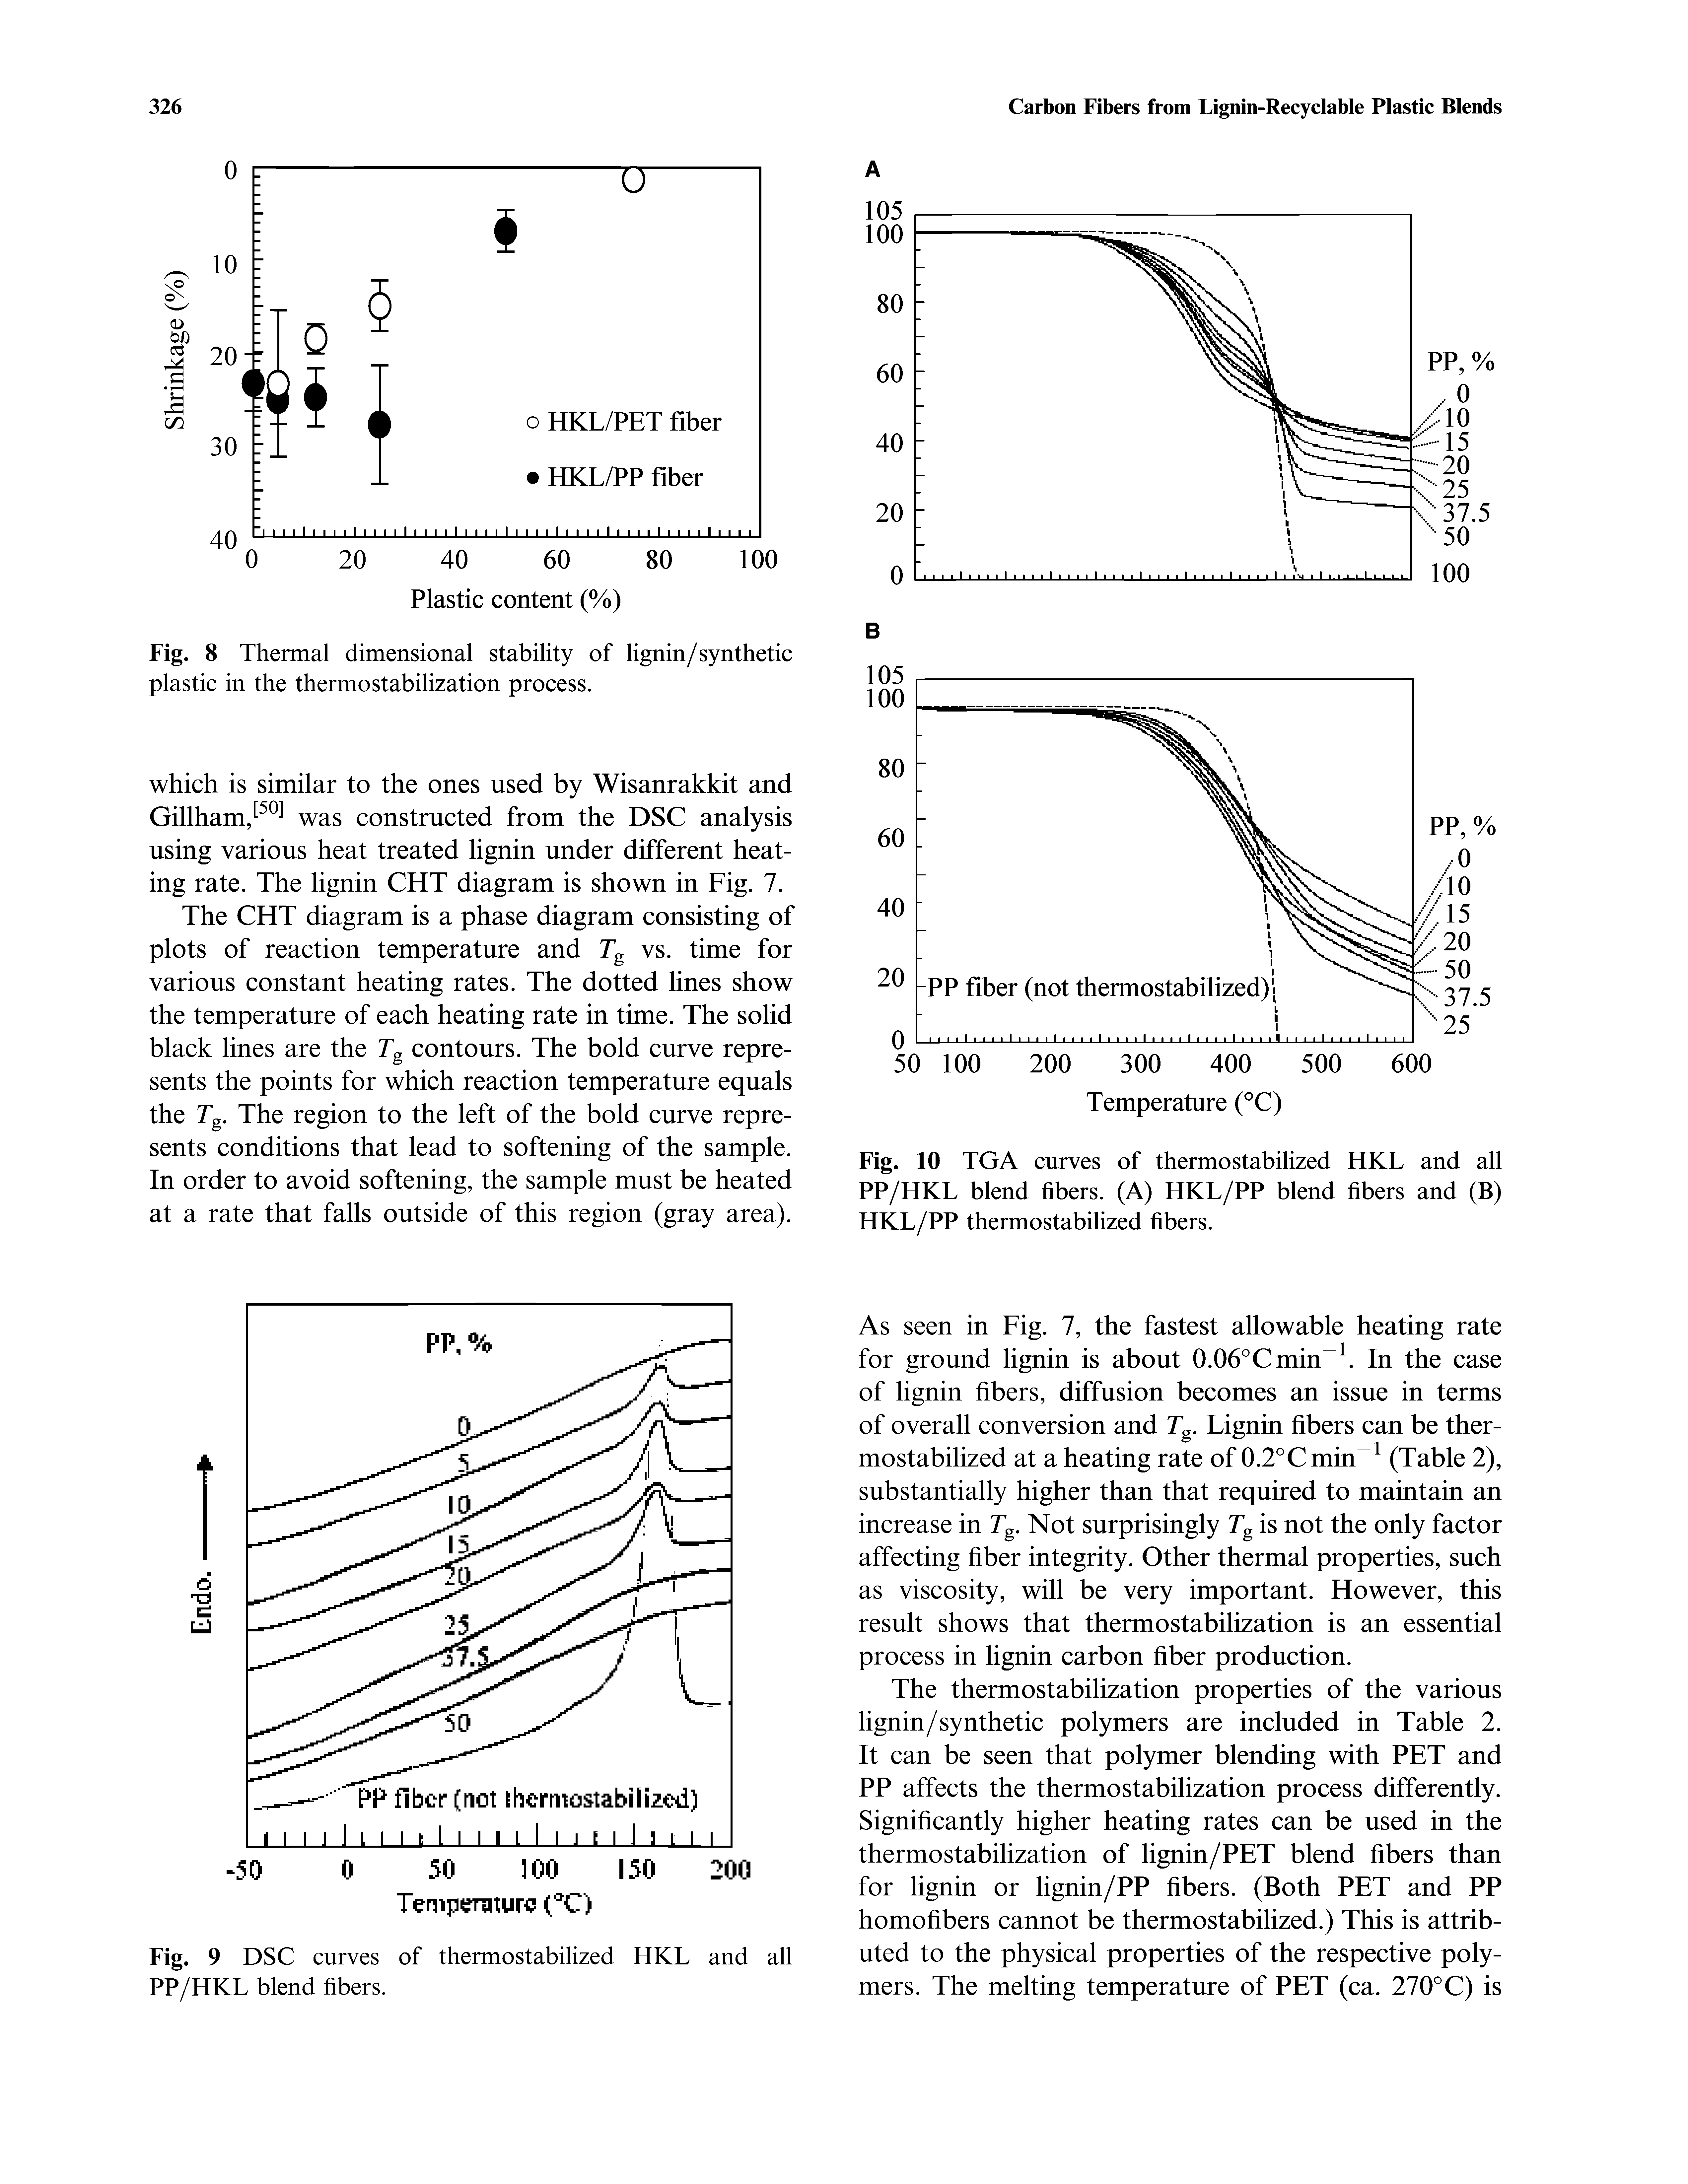 Fig. 8 Thermal dimensional stability of lignin/synthetic plastic in the thermo stabilization process.